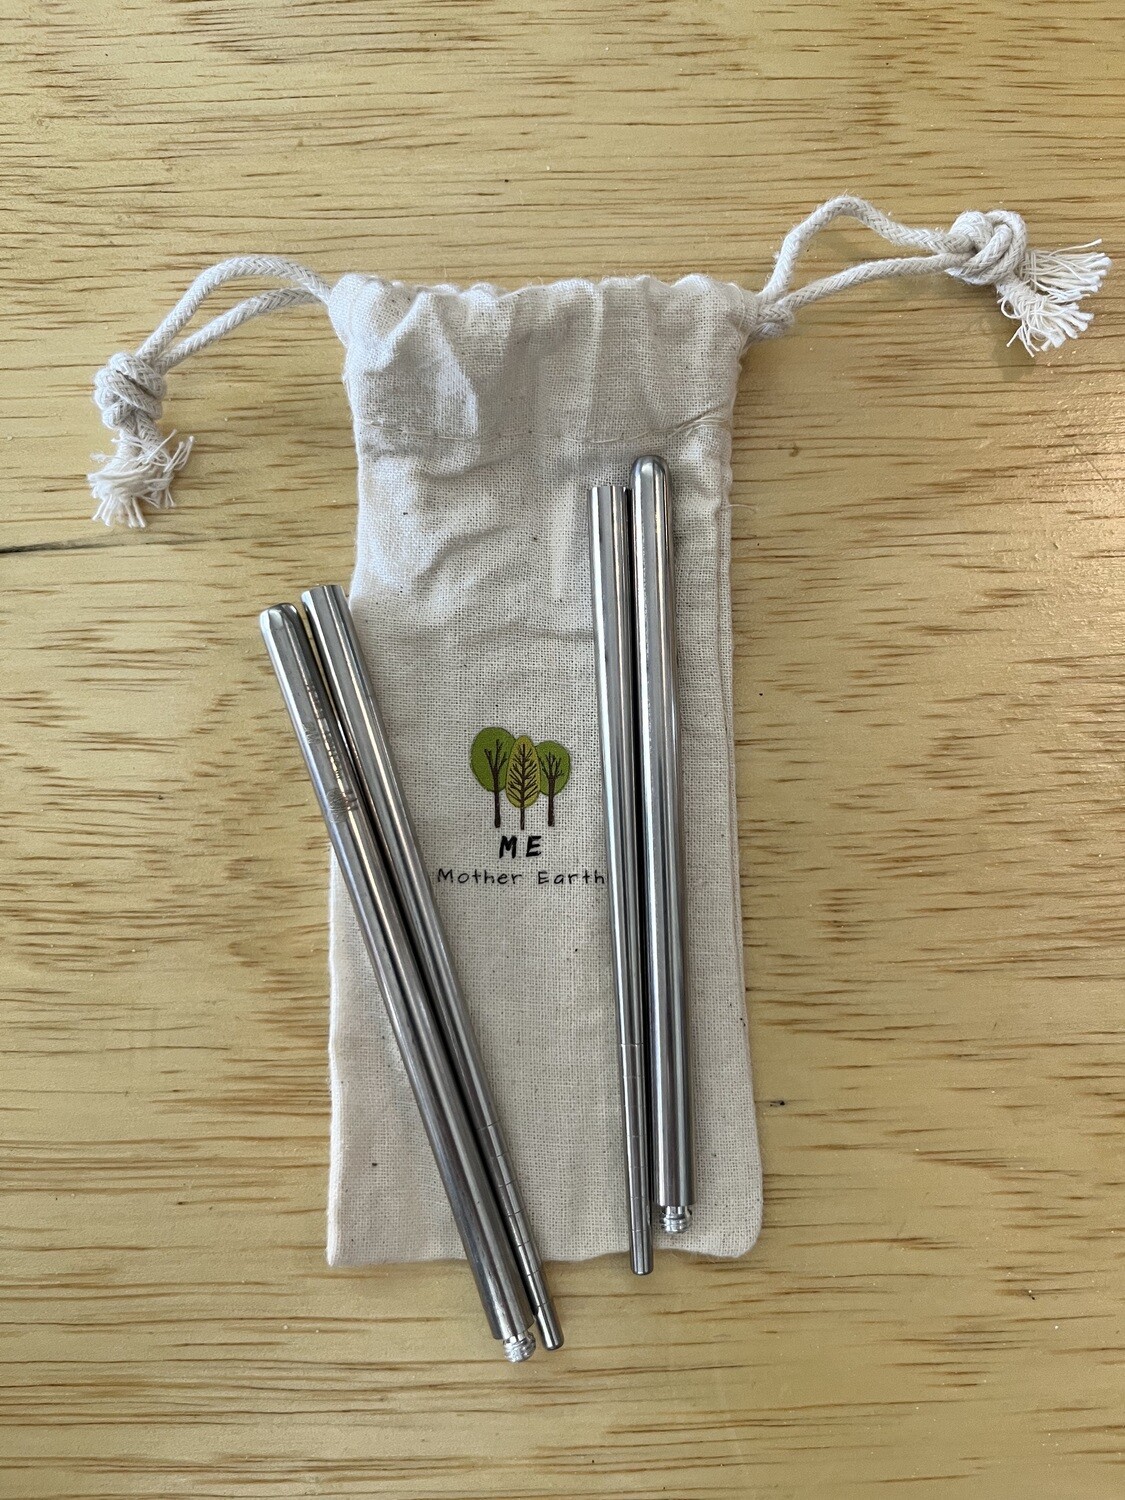 Chopsticks, Stainless Steel w/ Bag - Me Mother Earth